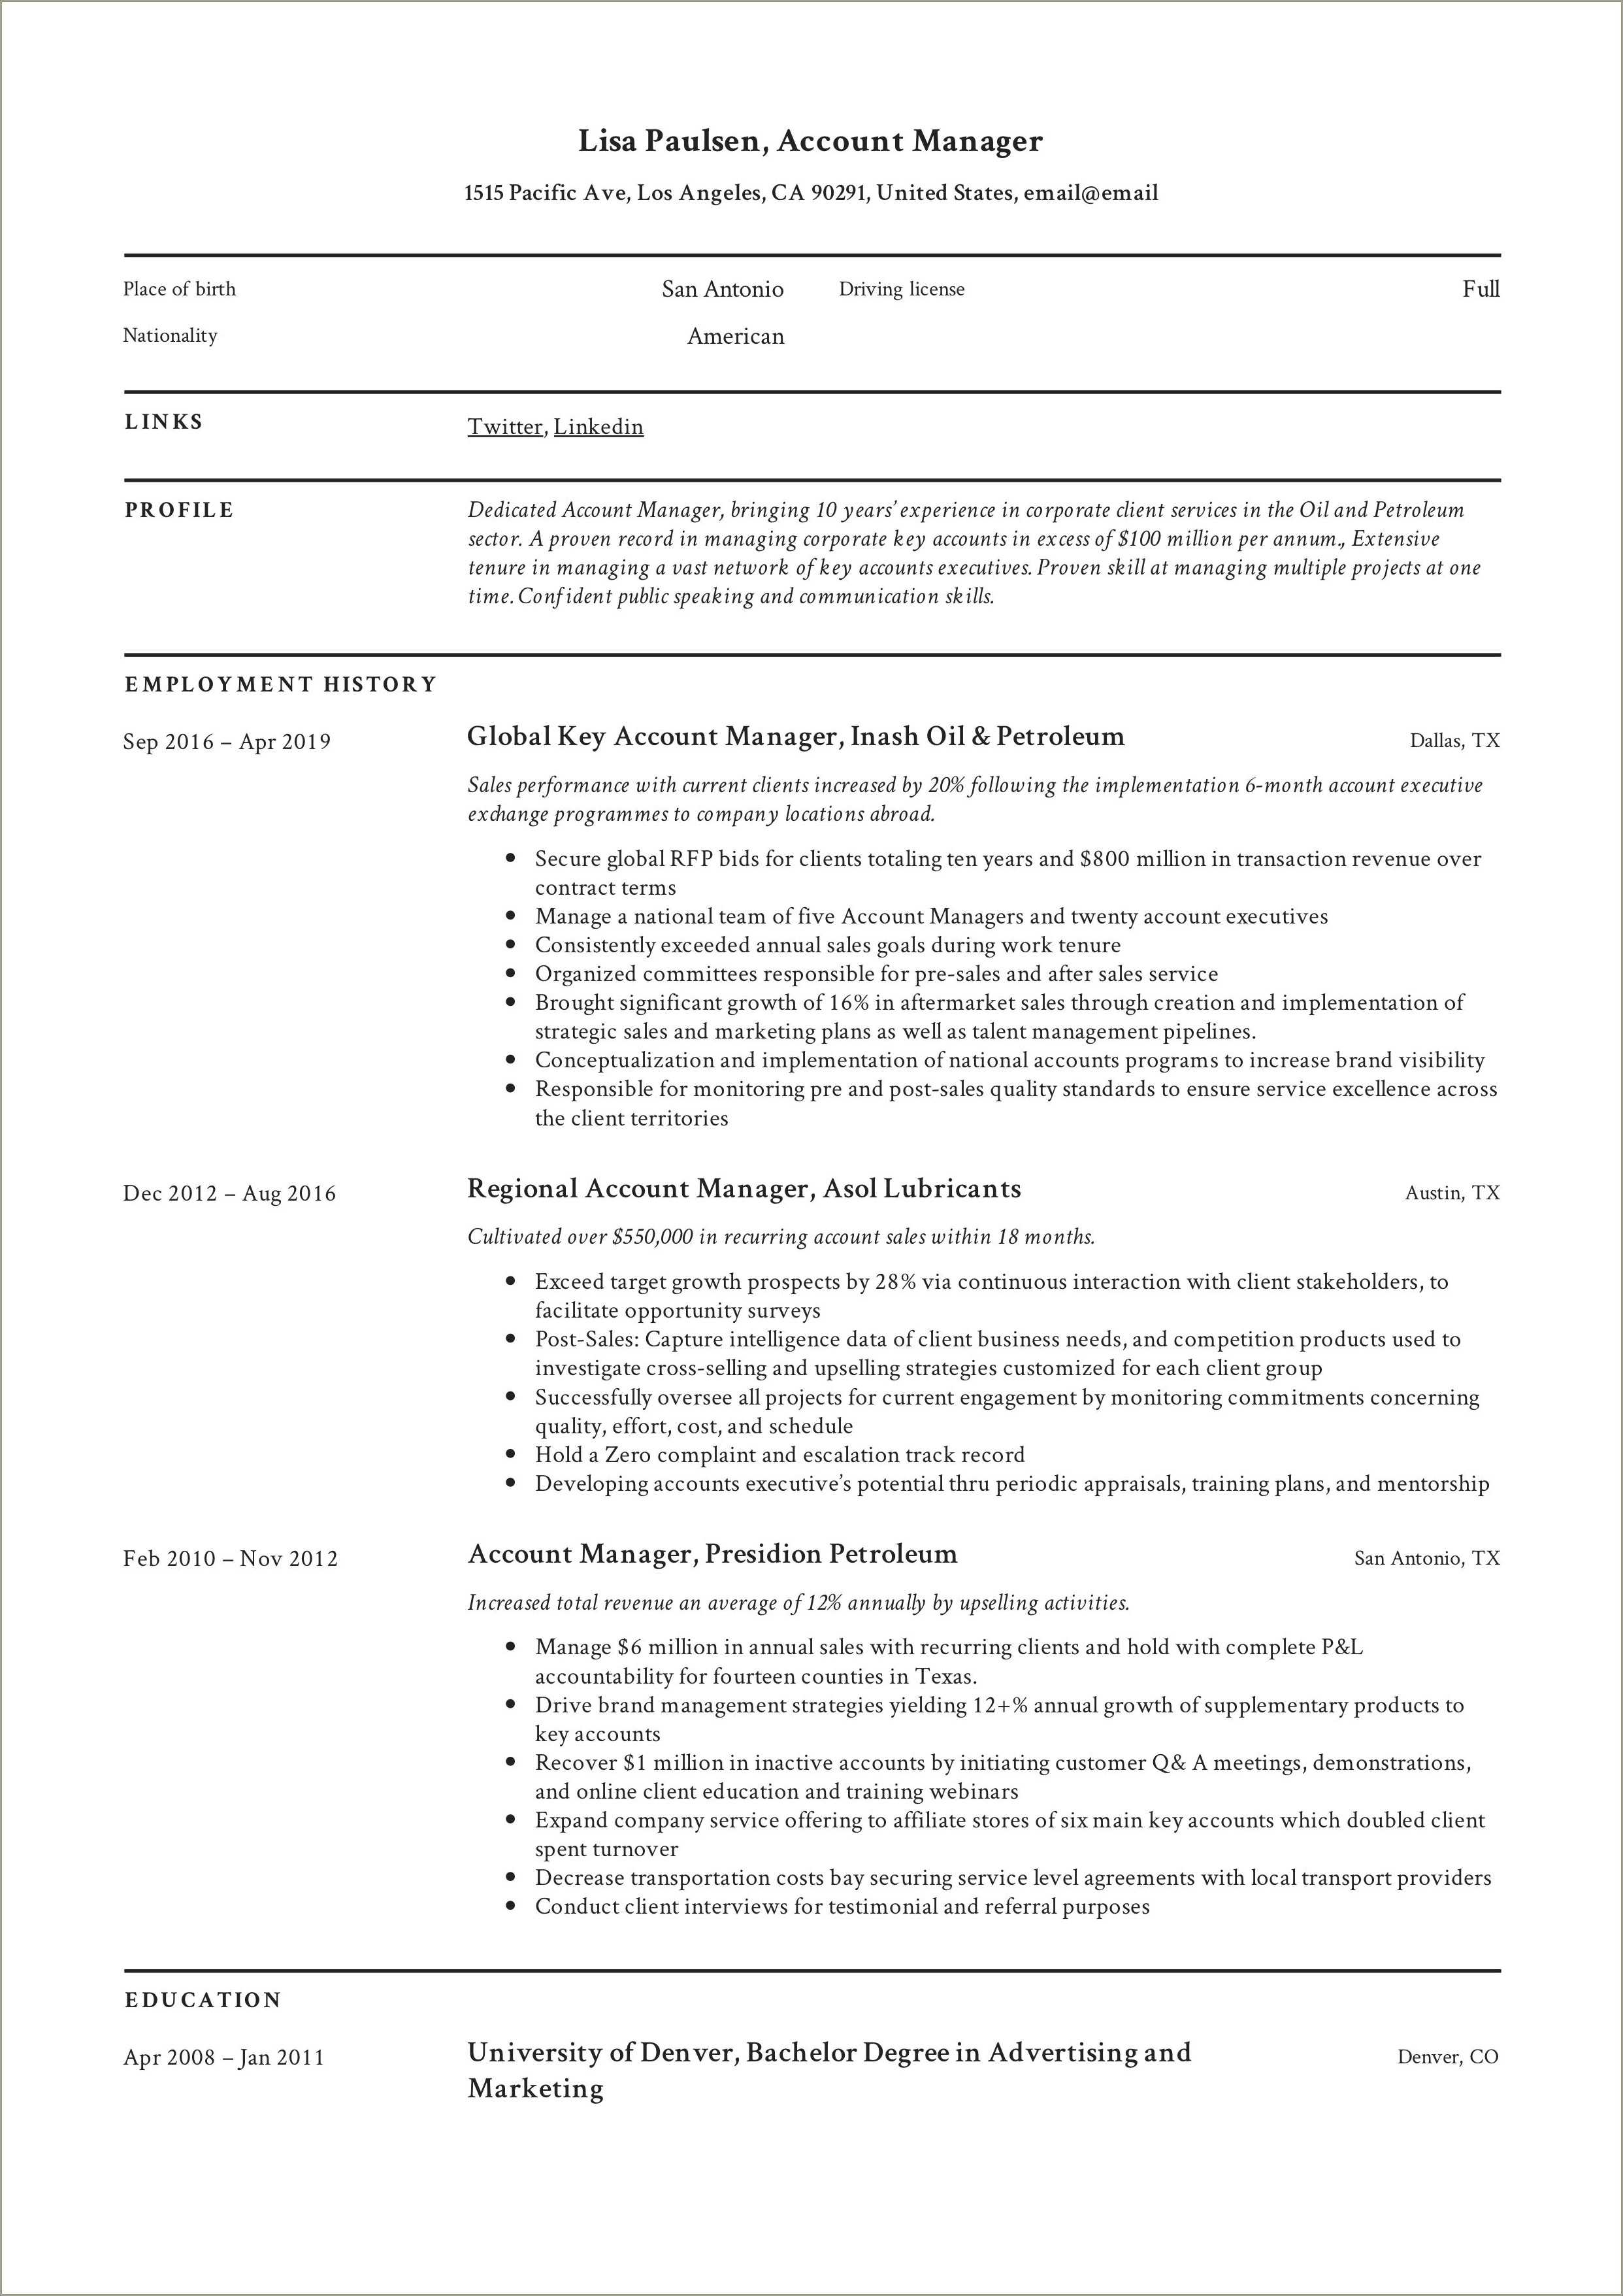 Recruitment Manager Resume Sample India - Resume Example Gallery